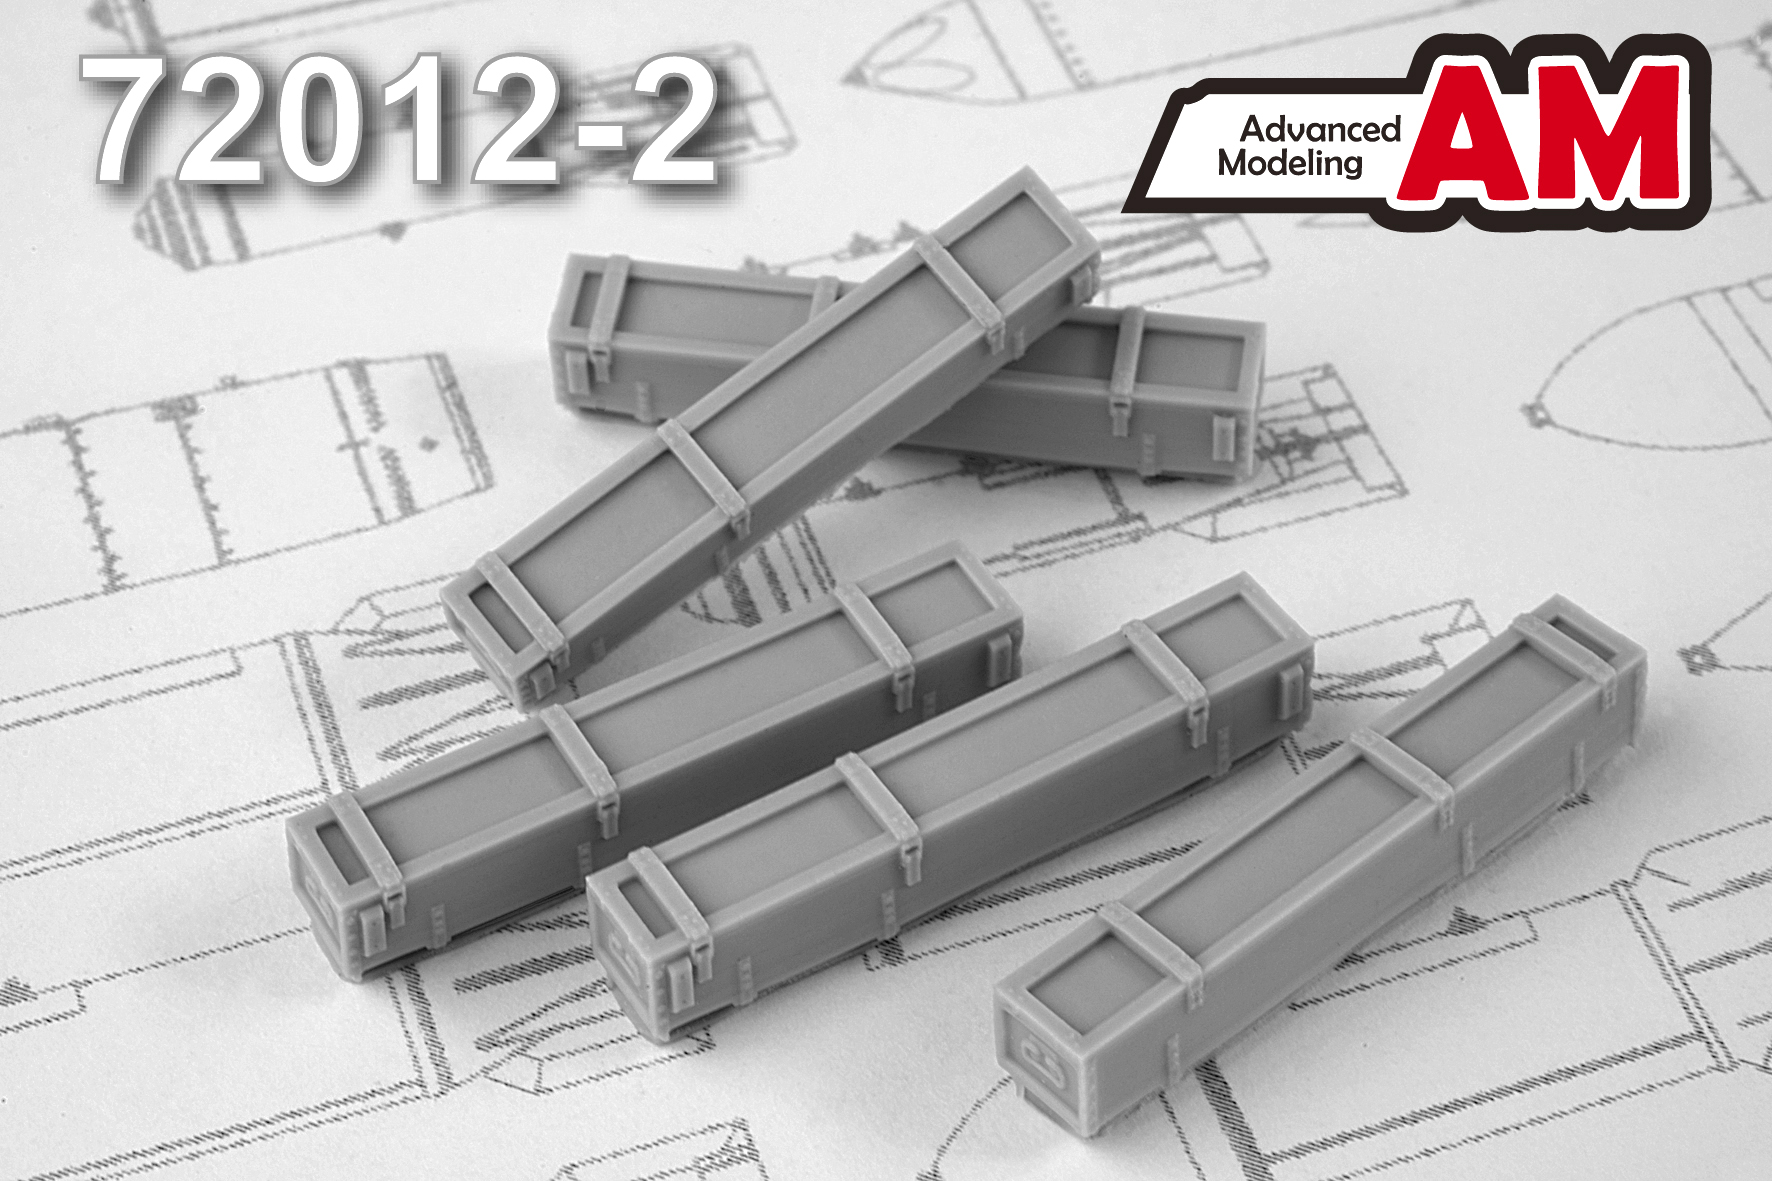 Additions (3D resin printing) 1/72 NAR C-8 container (Advanced Modeling) 